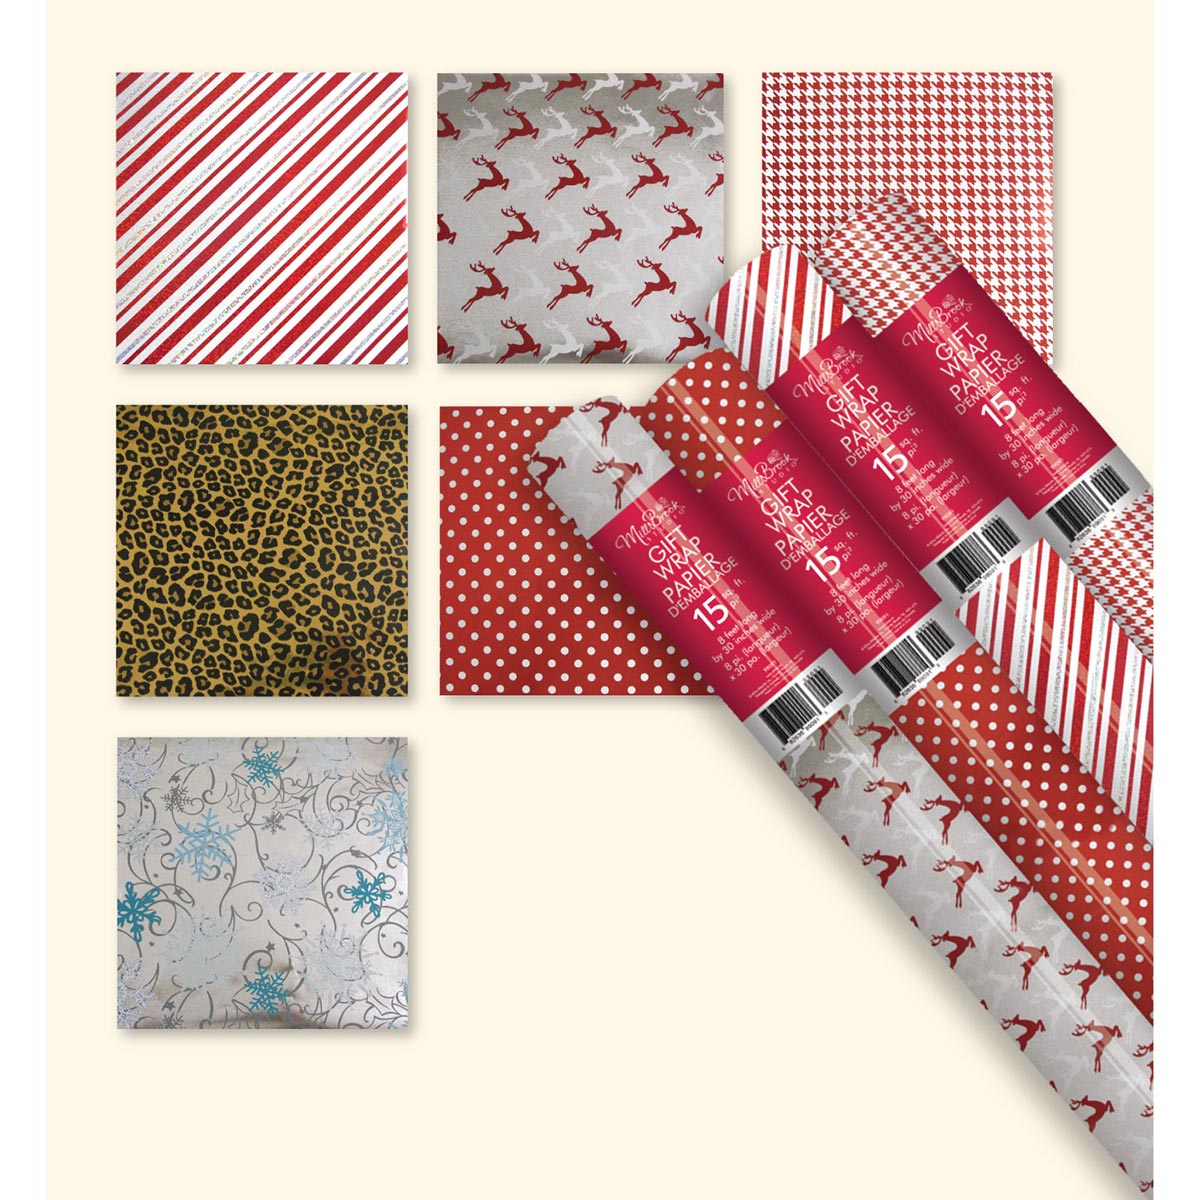 A-LINE Christmas Christmas Metallic Roll Wrap, Assortment, 180 Inches, 1 Count 882636990913